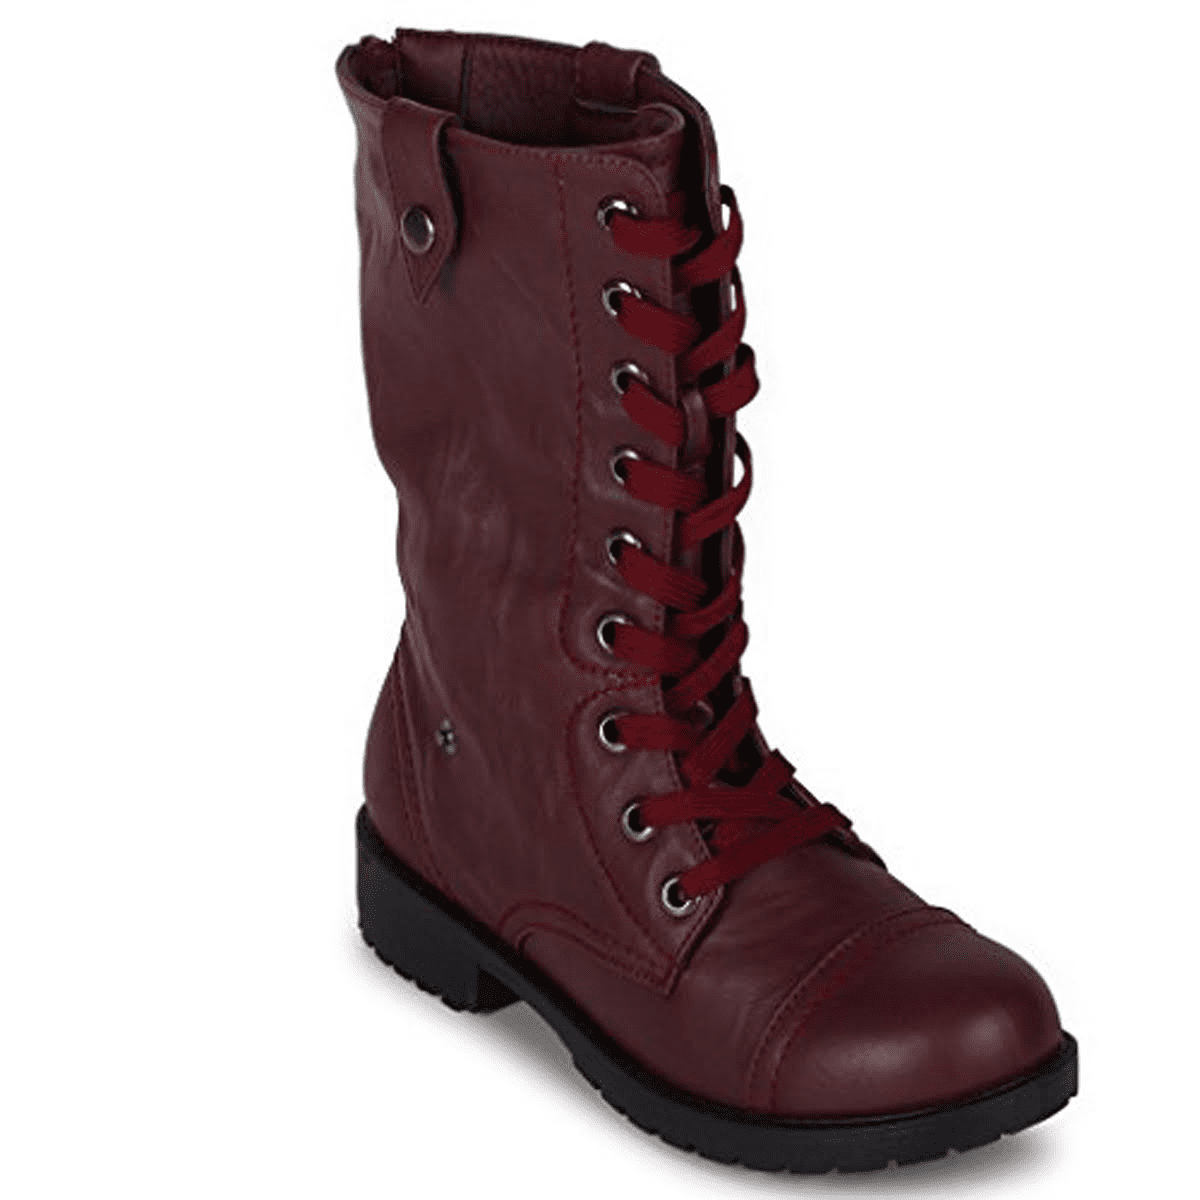 Wanted Colorado Burgundy vegan Combat Boot Fold-Over Knit lace up ...